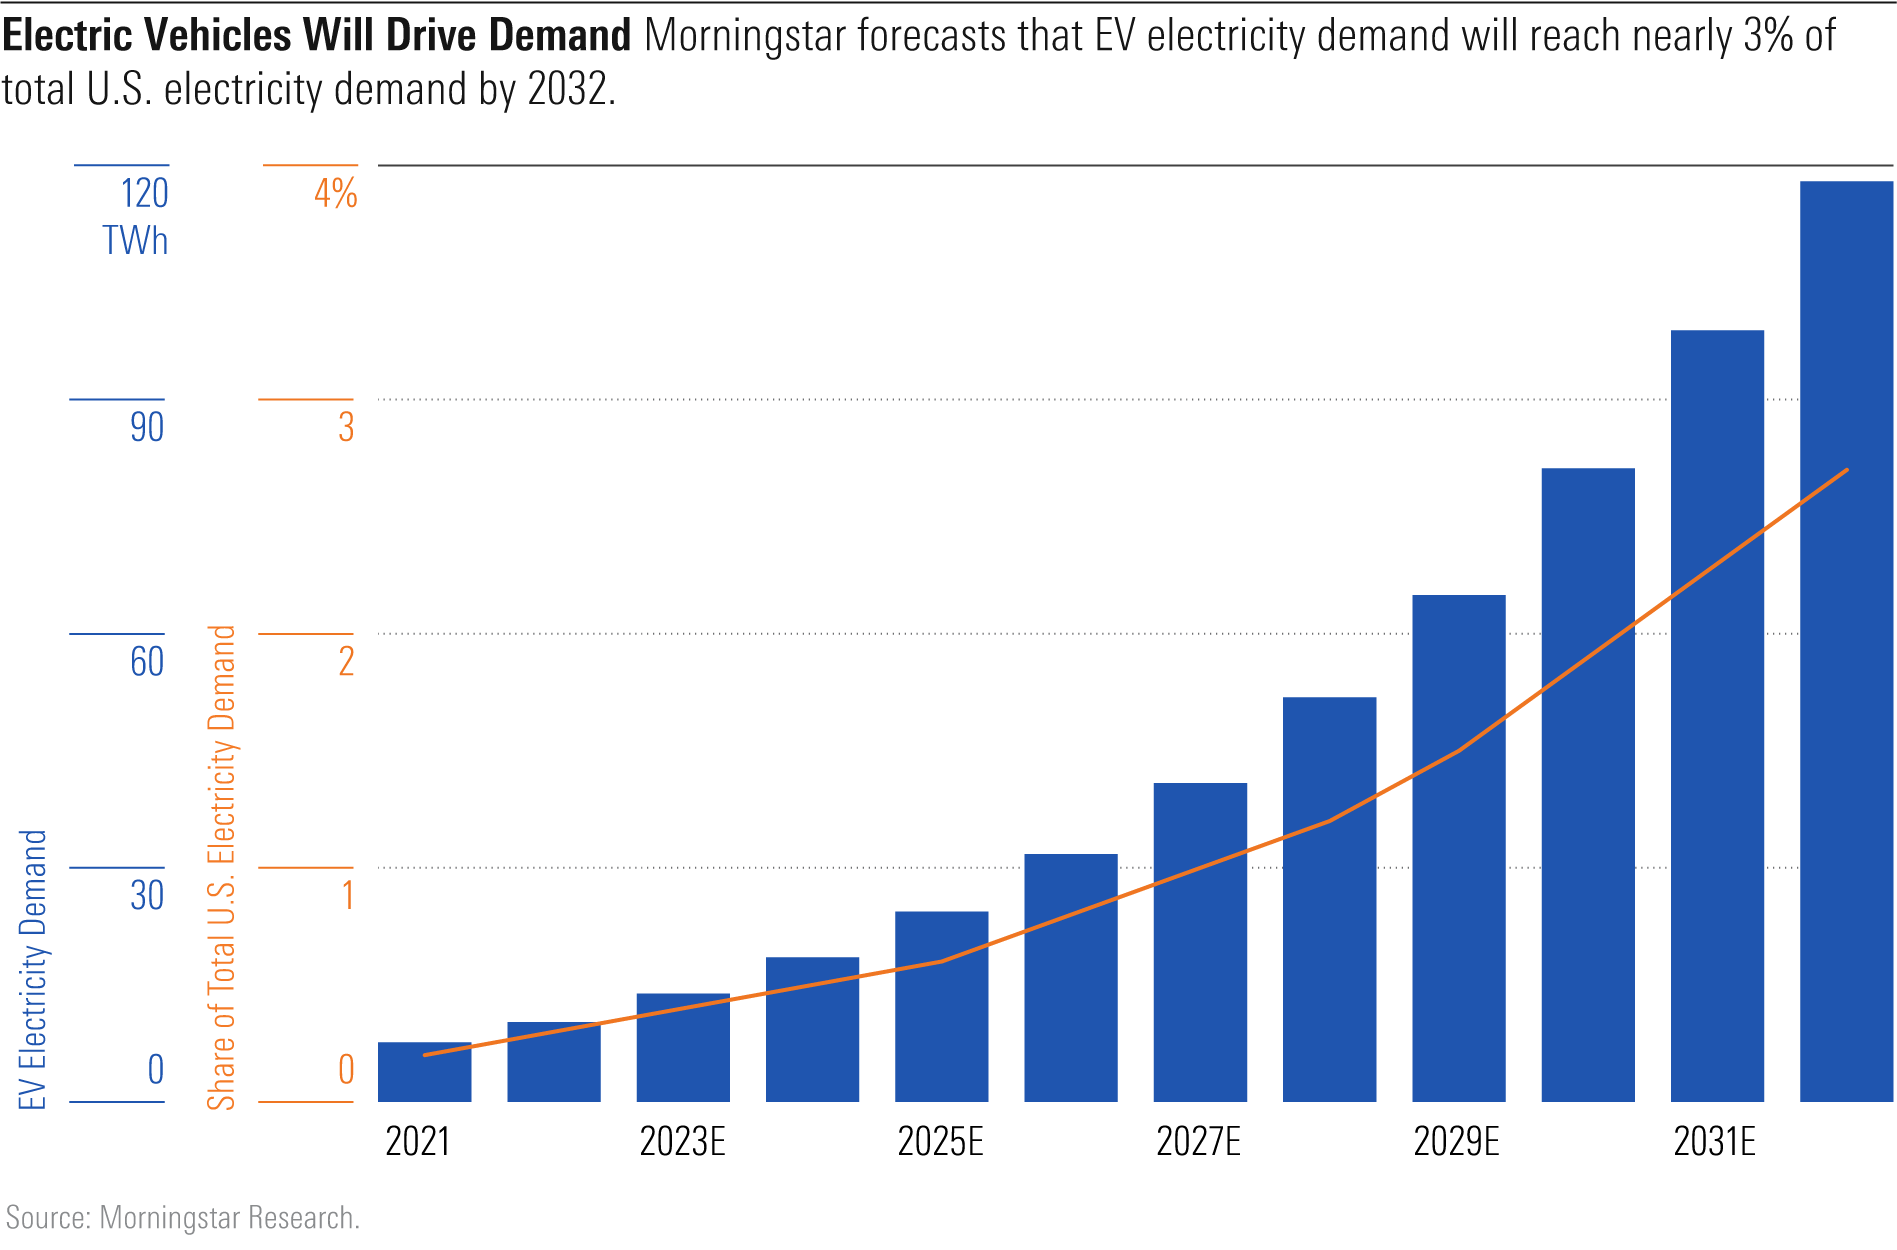 A chart that shows that EV electricity demand will reach nearly 3% of total U.S. electricity demand by 2032.